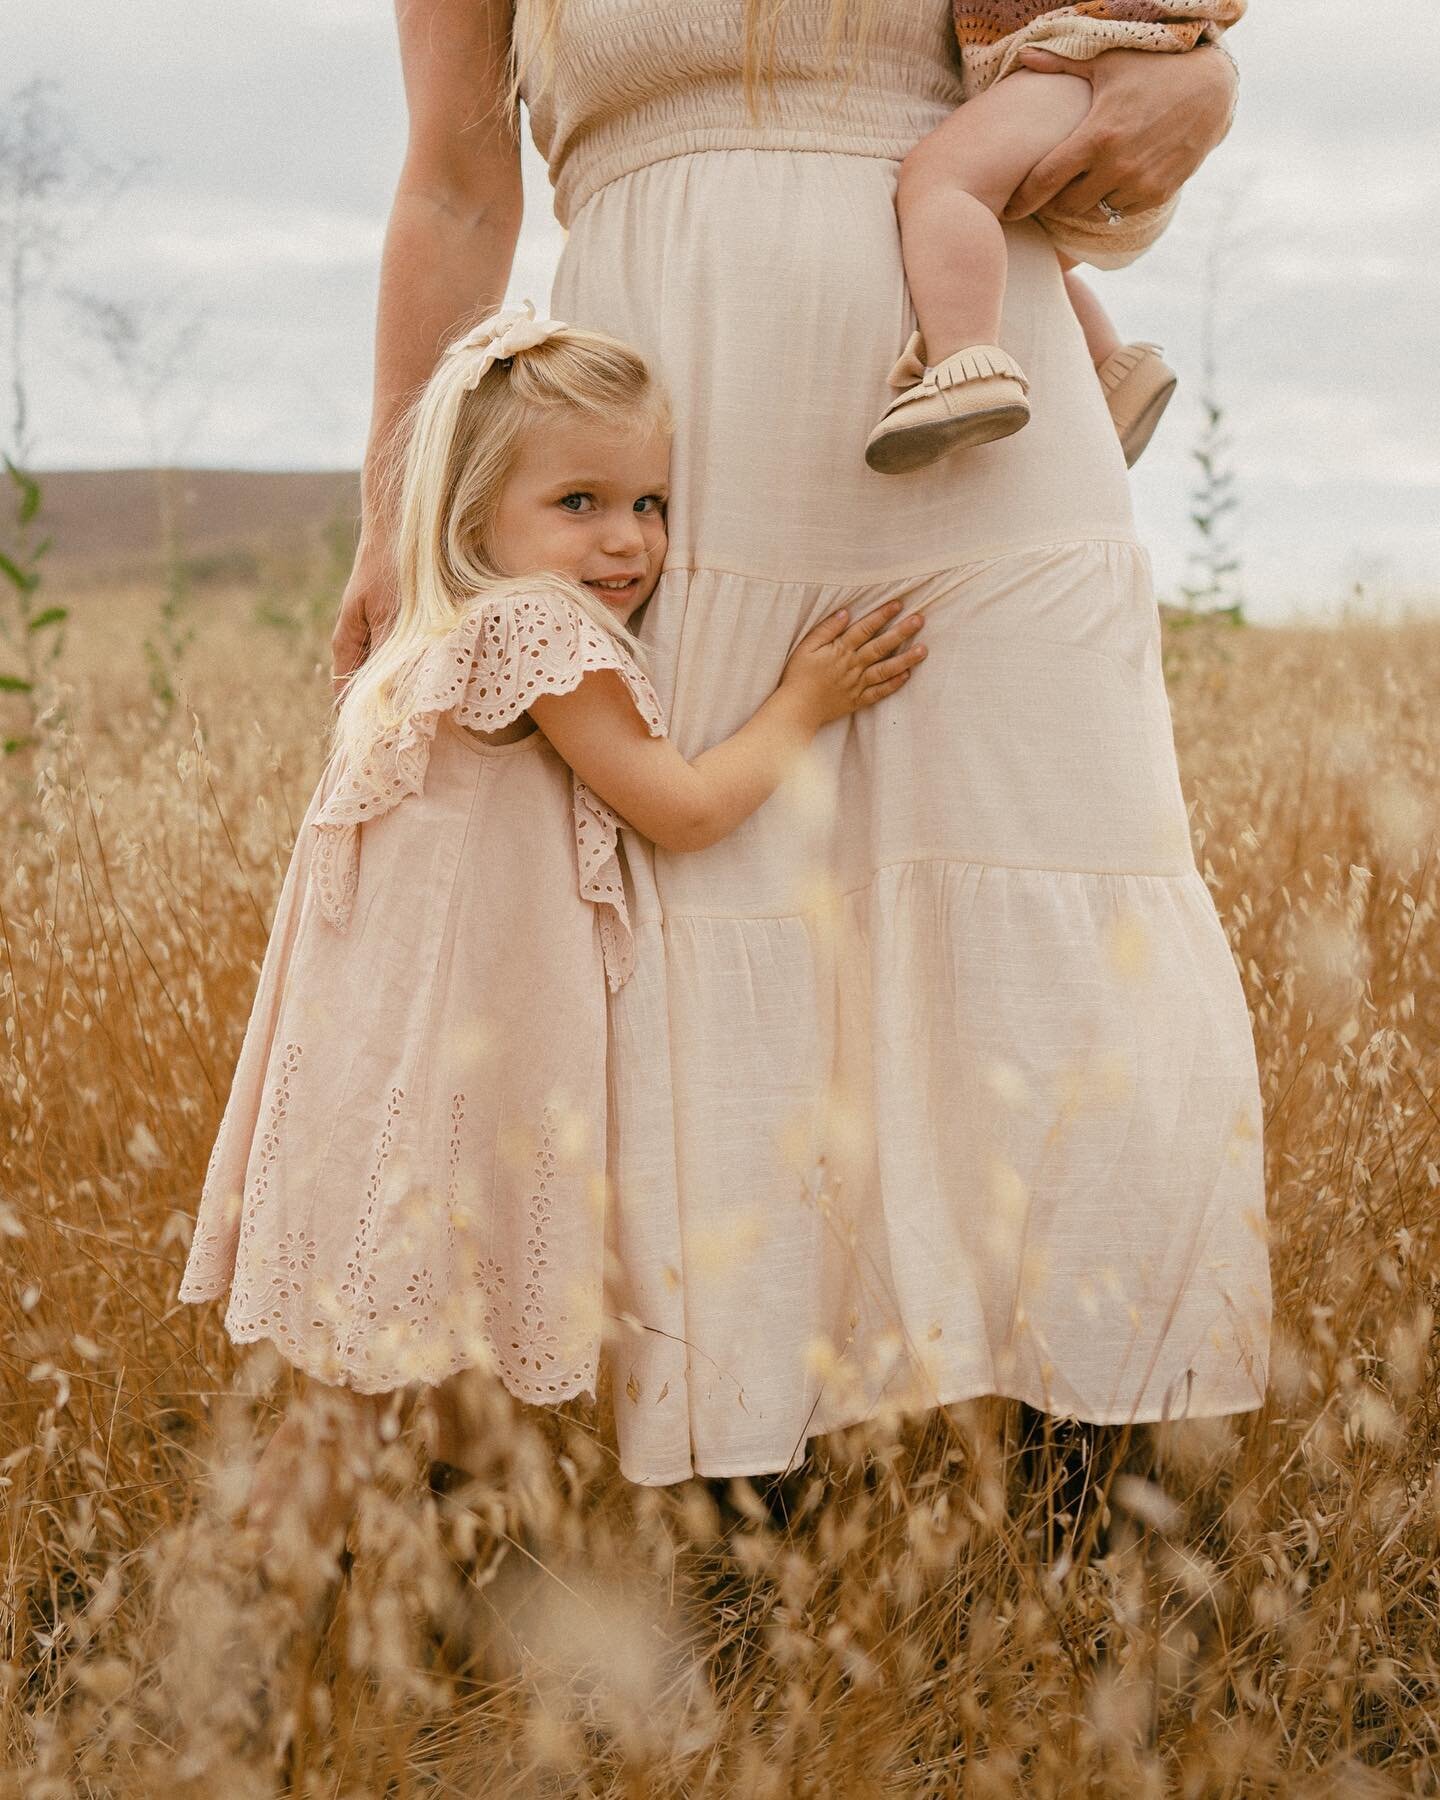 Sneak peek from the sweetest mommy &amp; me session. These motherhood sessions are so special. Moms, book the photoshoot, get in the photos! I promise you will never regret it. These photos are from a little collab I did with my friend @jamiemarie_ph